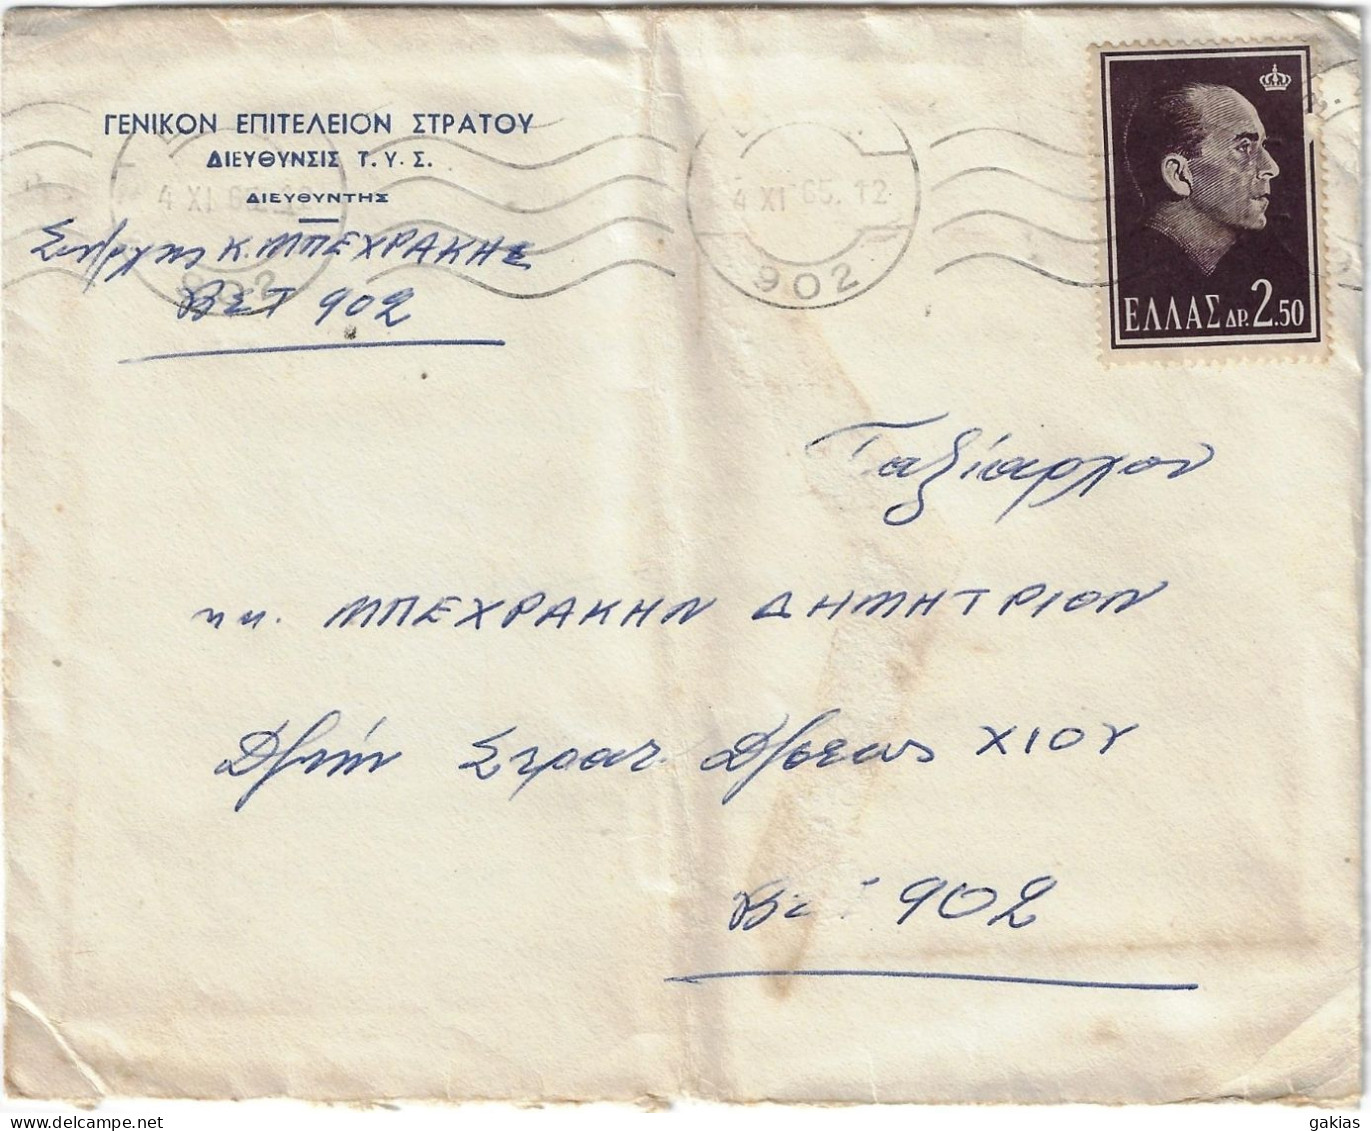 GREECE 1965 MILITARY COVER POST "902" ARMY GENERAL STAFF. - Covers & Documents